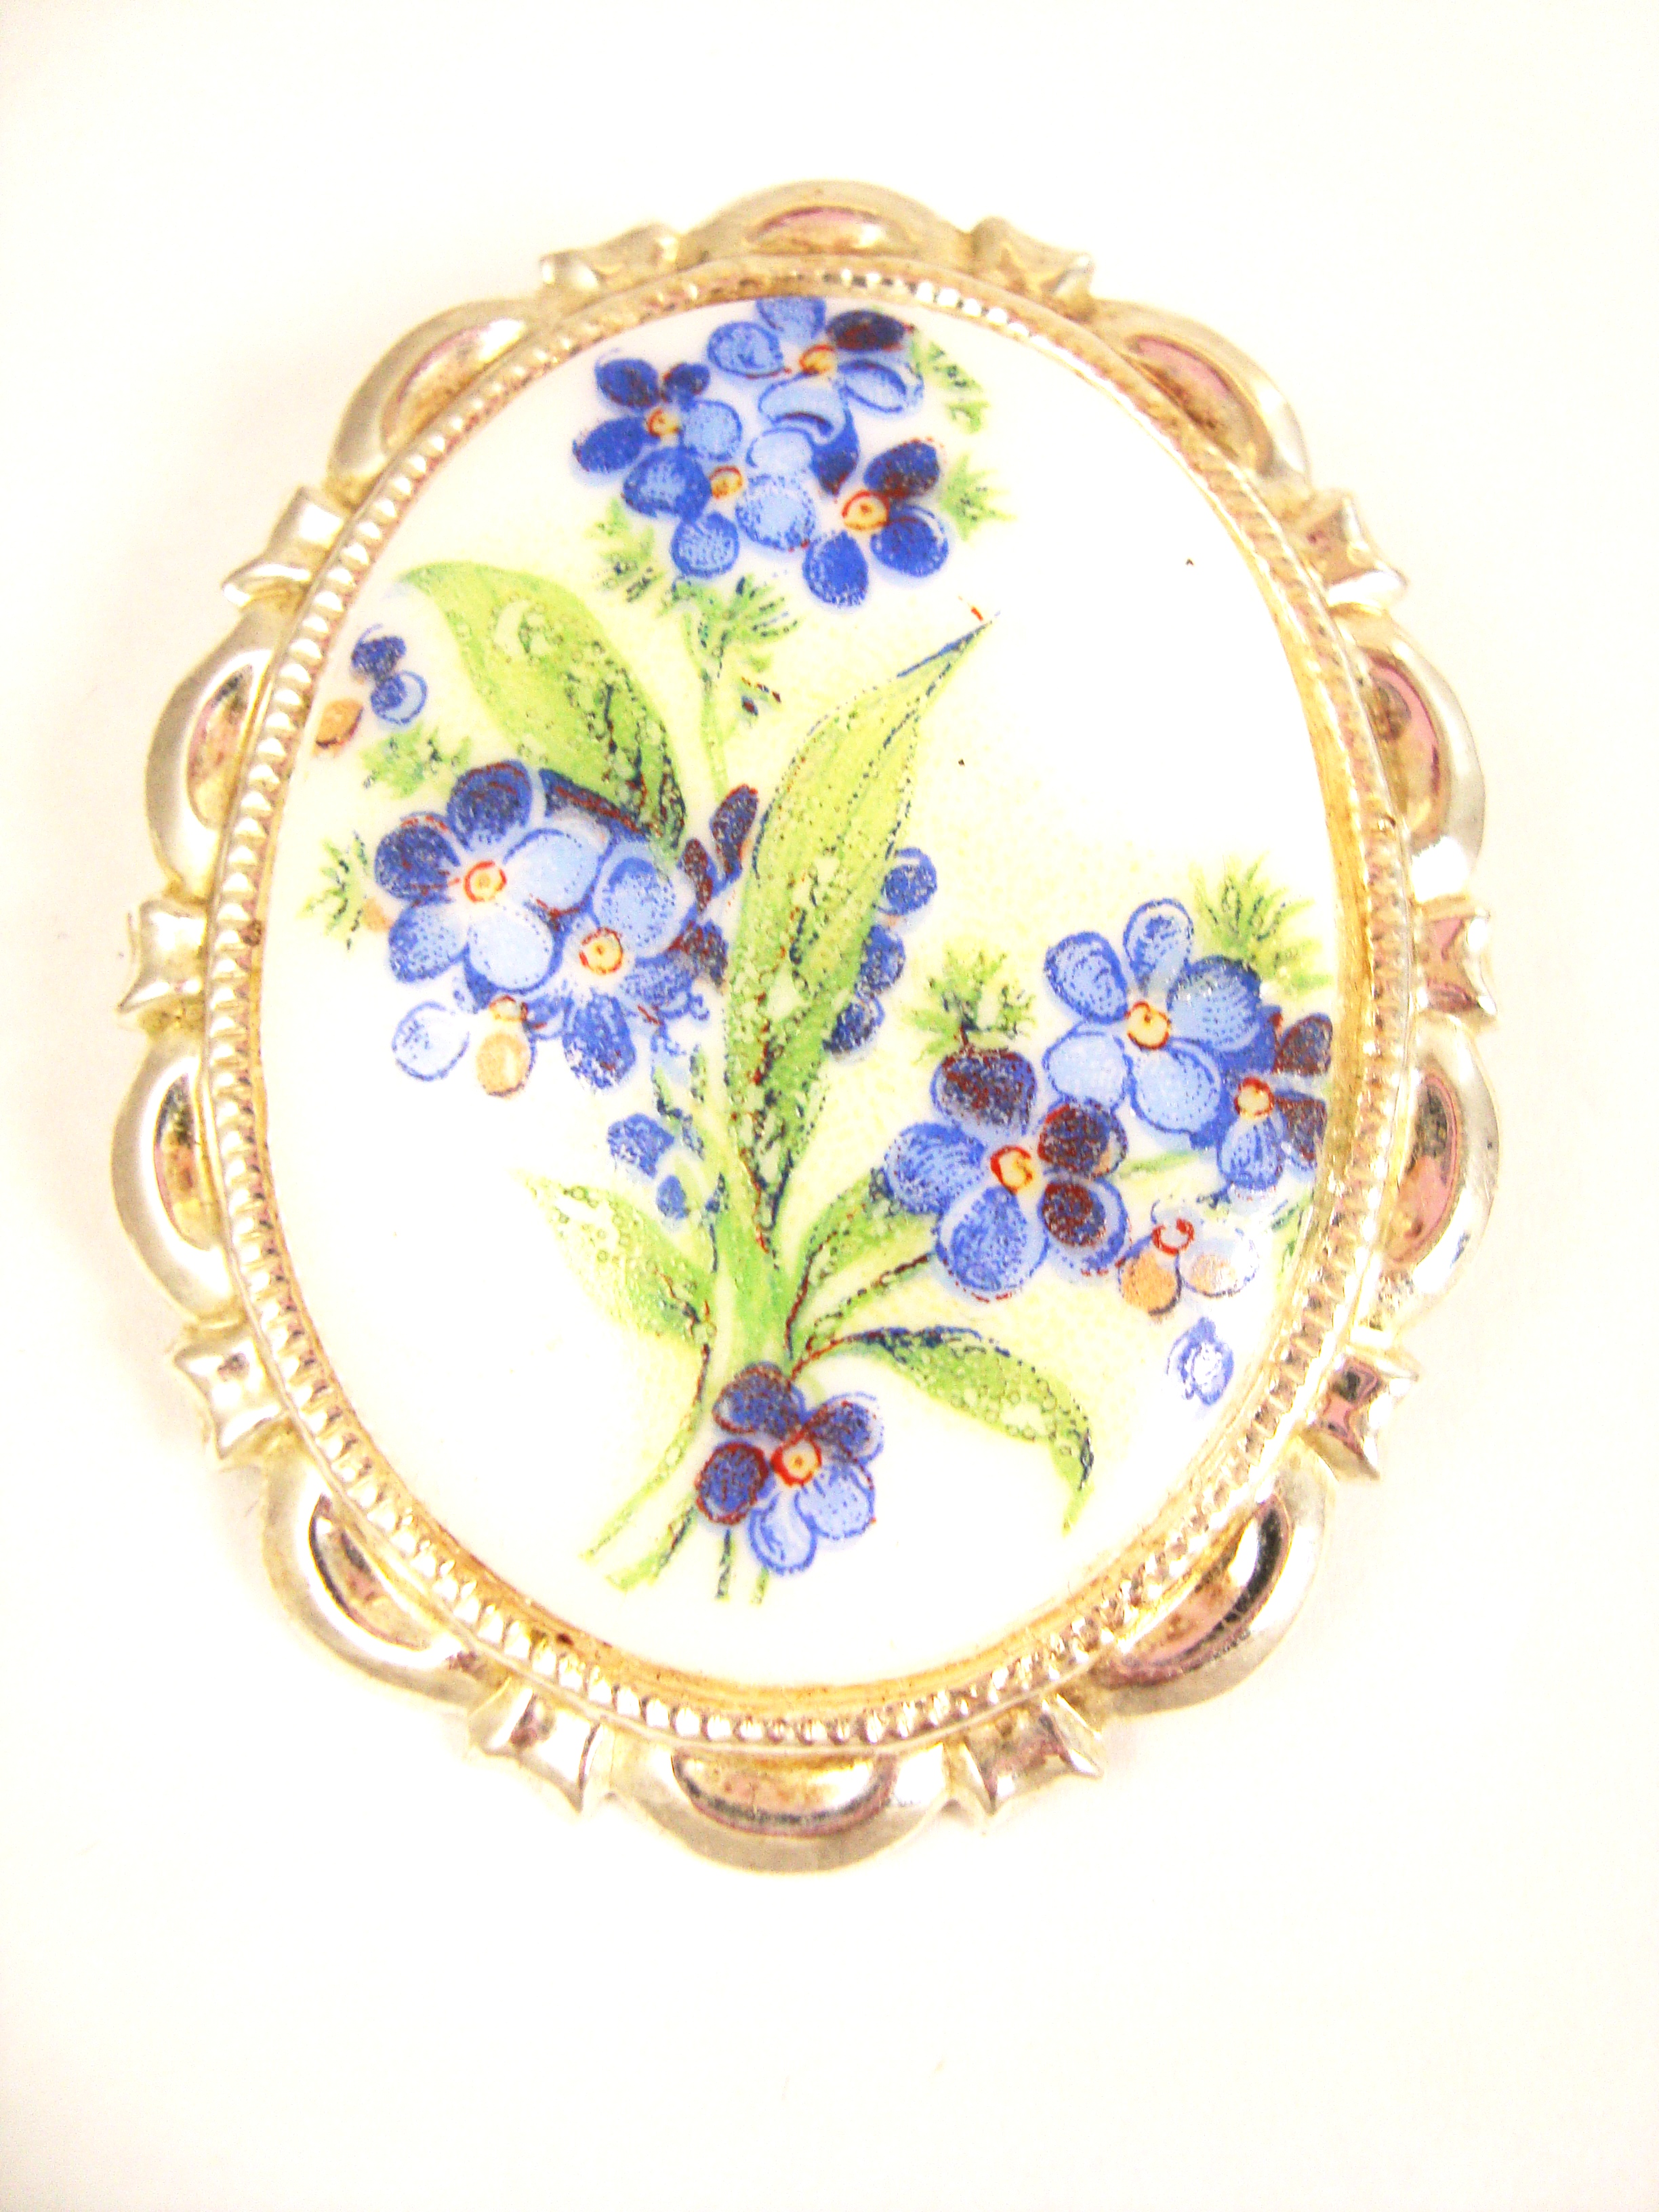 Forget-me-not Cameo